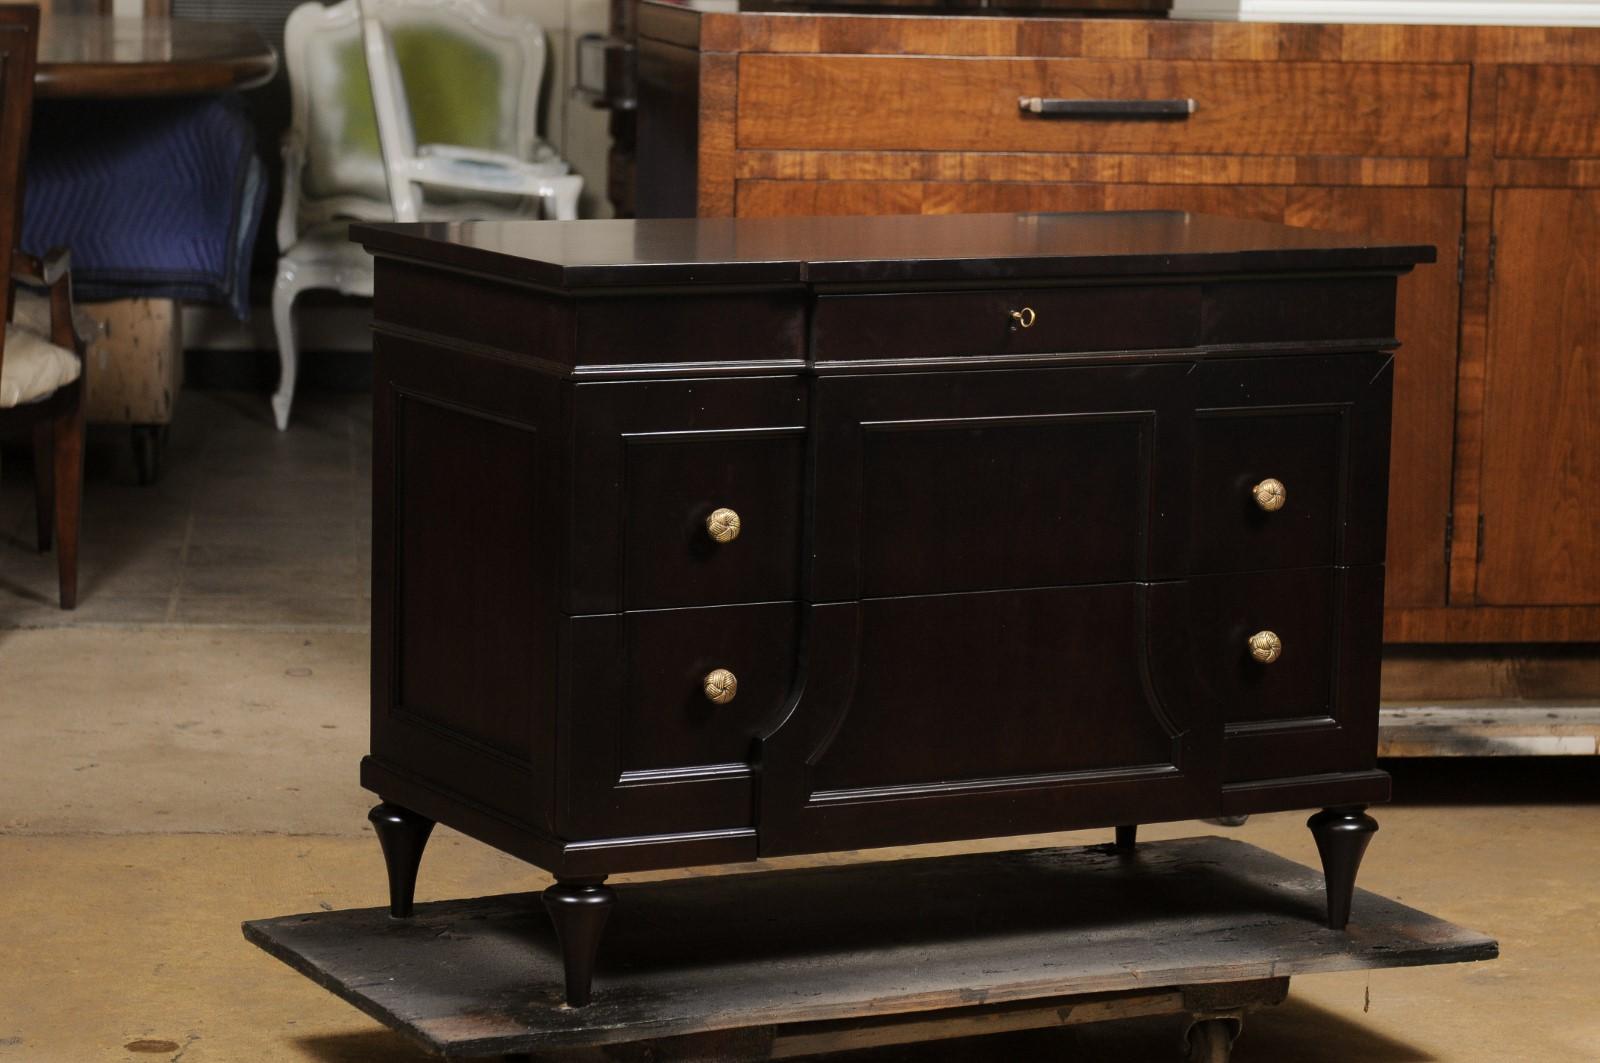 Baker mahogany chest of drawers mini credenza. Features fine veneered accents with ornate brass hardware. Two large drawers with smaller drawers at the top. Dimensions: 29 x 40 x 20 in. Ebony/black finish.